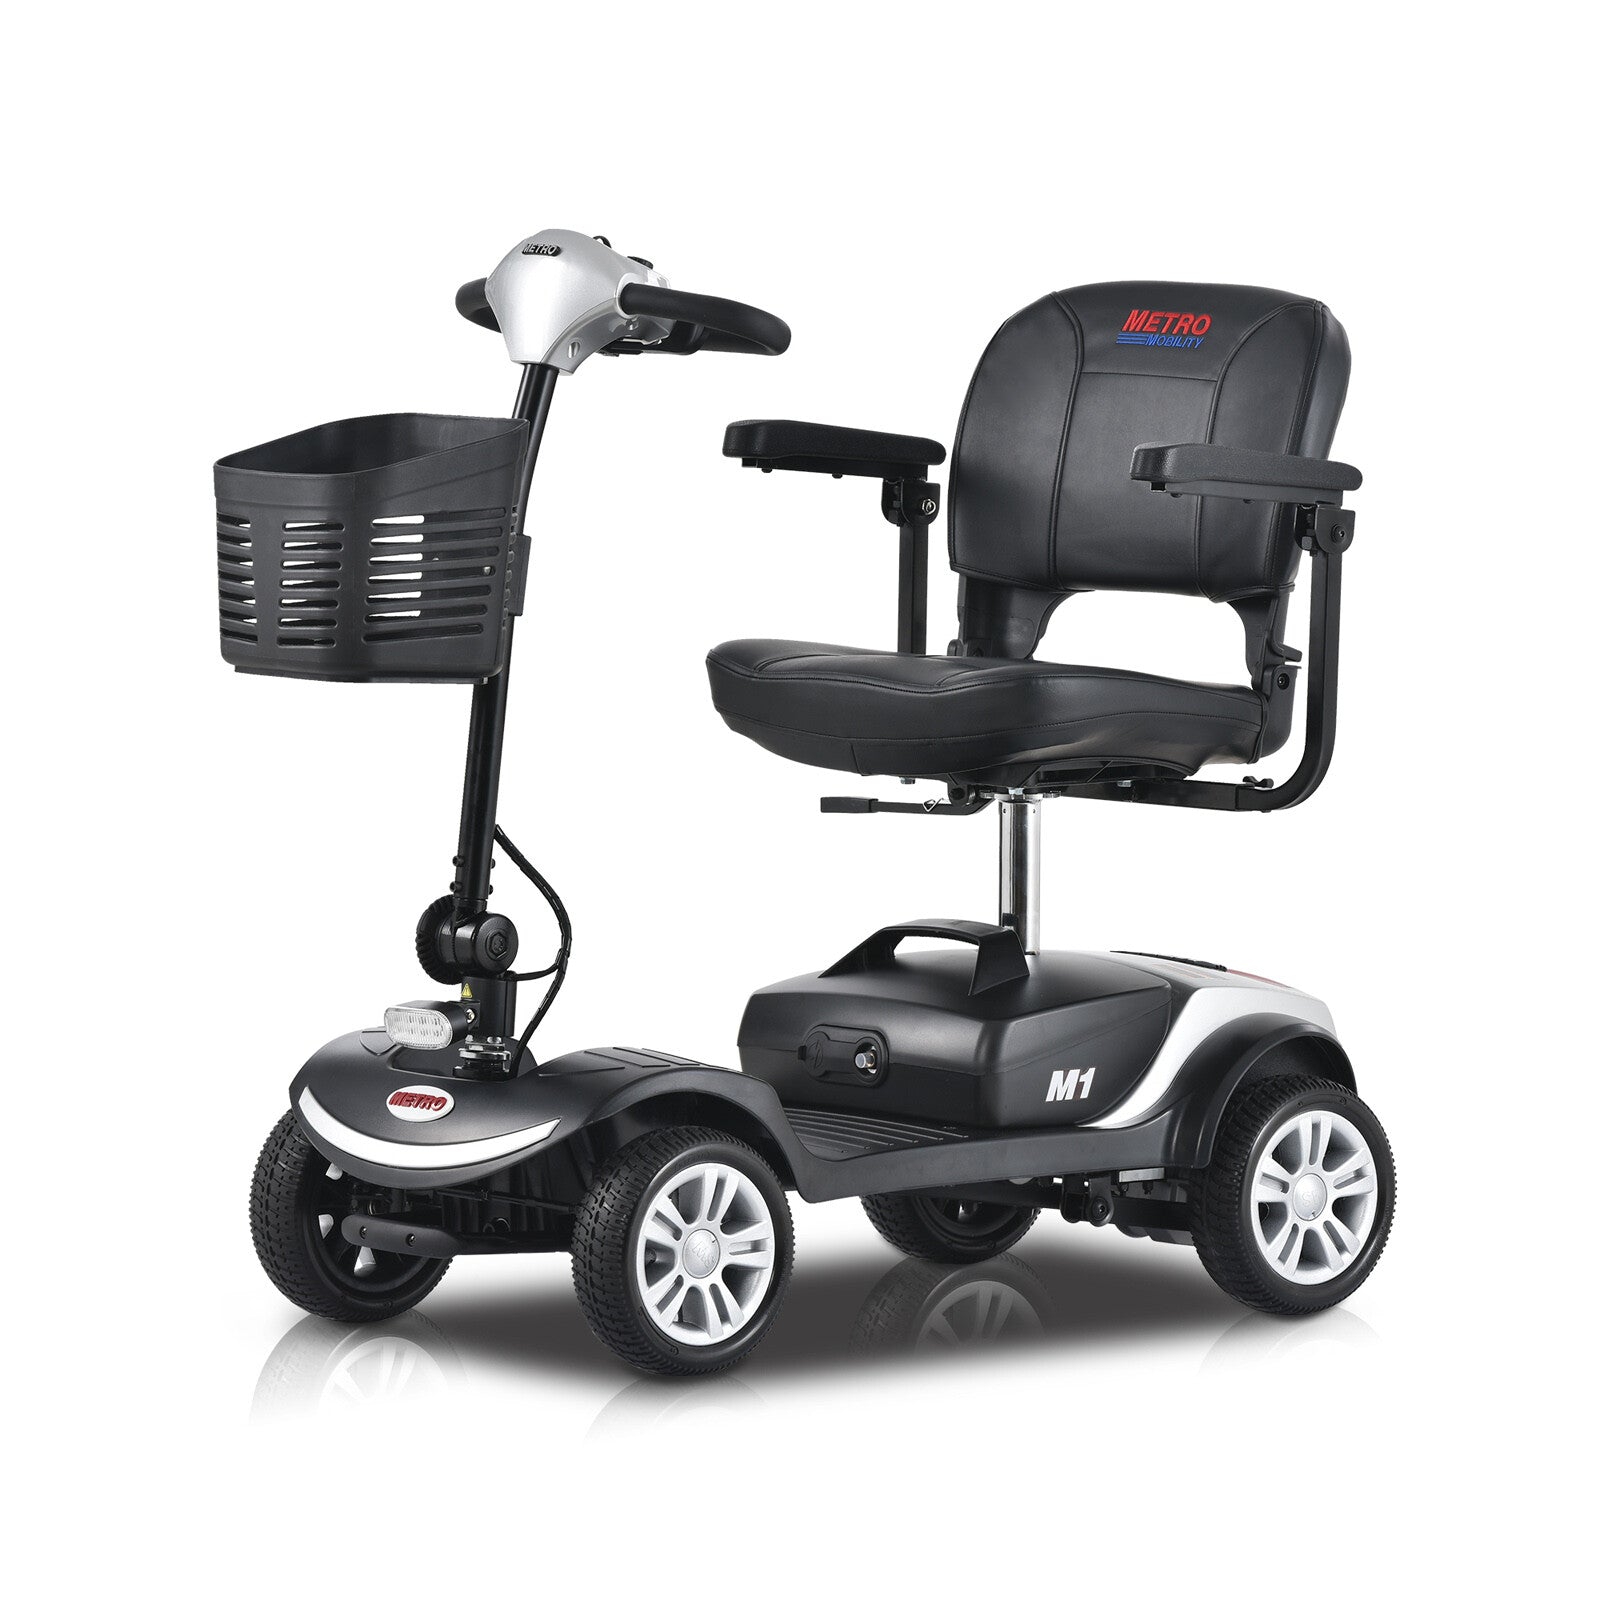 OVERDRIVE Four Wheels Compact Travel Mobility Scooter with 300W Motor for Adult-300lbs, Silver